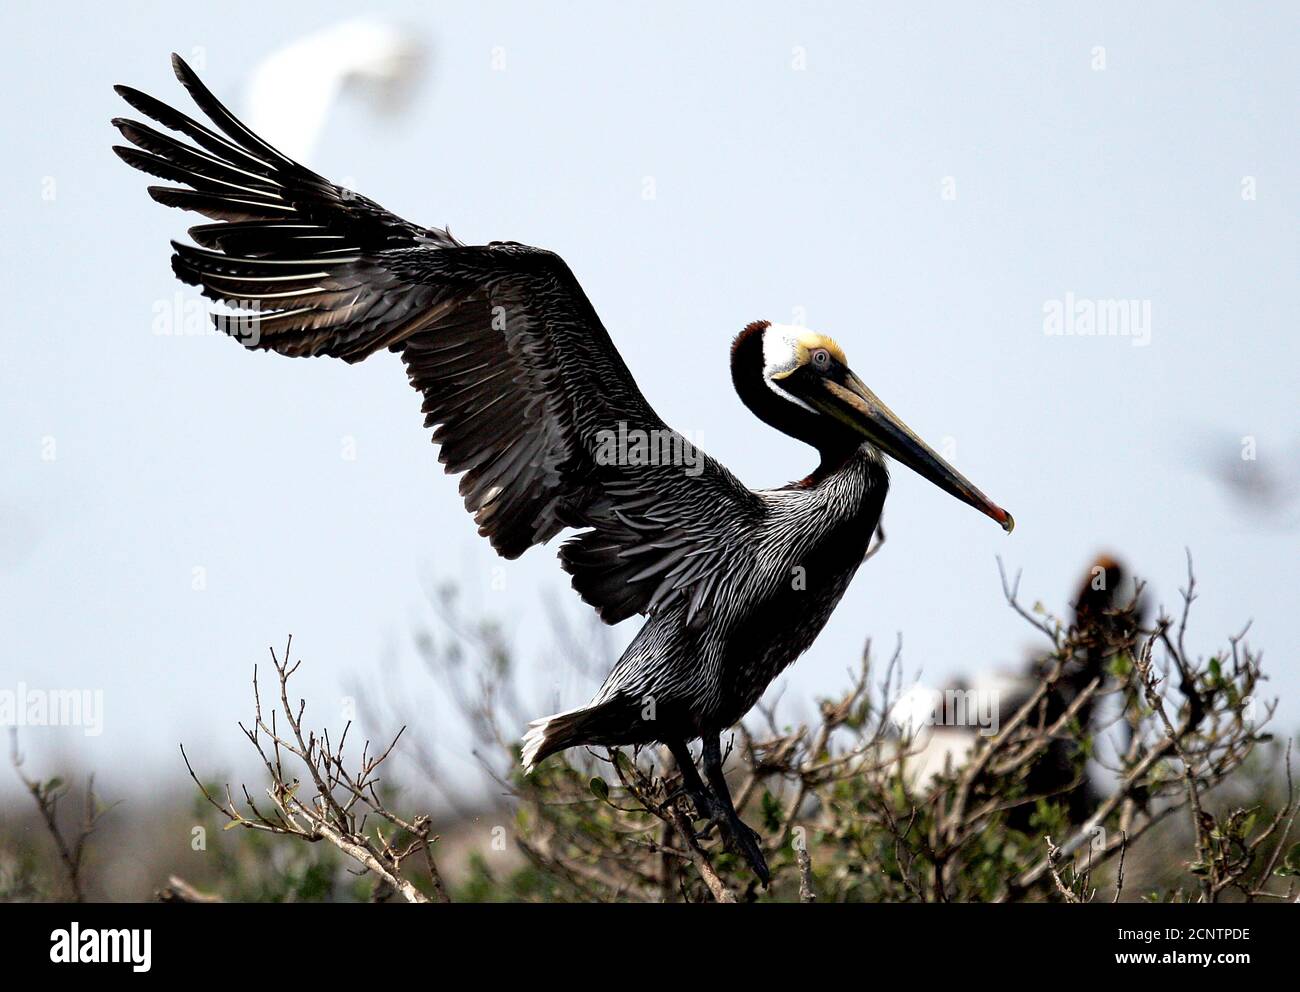 A healthy Brown Pelican spreads its wings at Cat Island in Barataria Bay near Myrtle Grove, Louisiana March 31, 2011. Cat Island was heavily impacted with oil due to the BP oil spill disaster last year. The UK energy giant's well leaked more than 200 million gallons of oil after the Deepwater Horizon drilling rig exploded on April 20 last year, killing 11 workers.     REUTERS/Sean Gardner (UNITED STATES - Tags: ANIMALS DISASTER ENVIRONMENT) Stock Photo